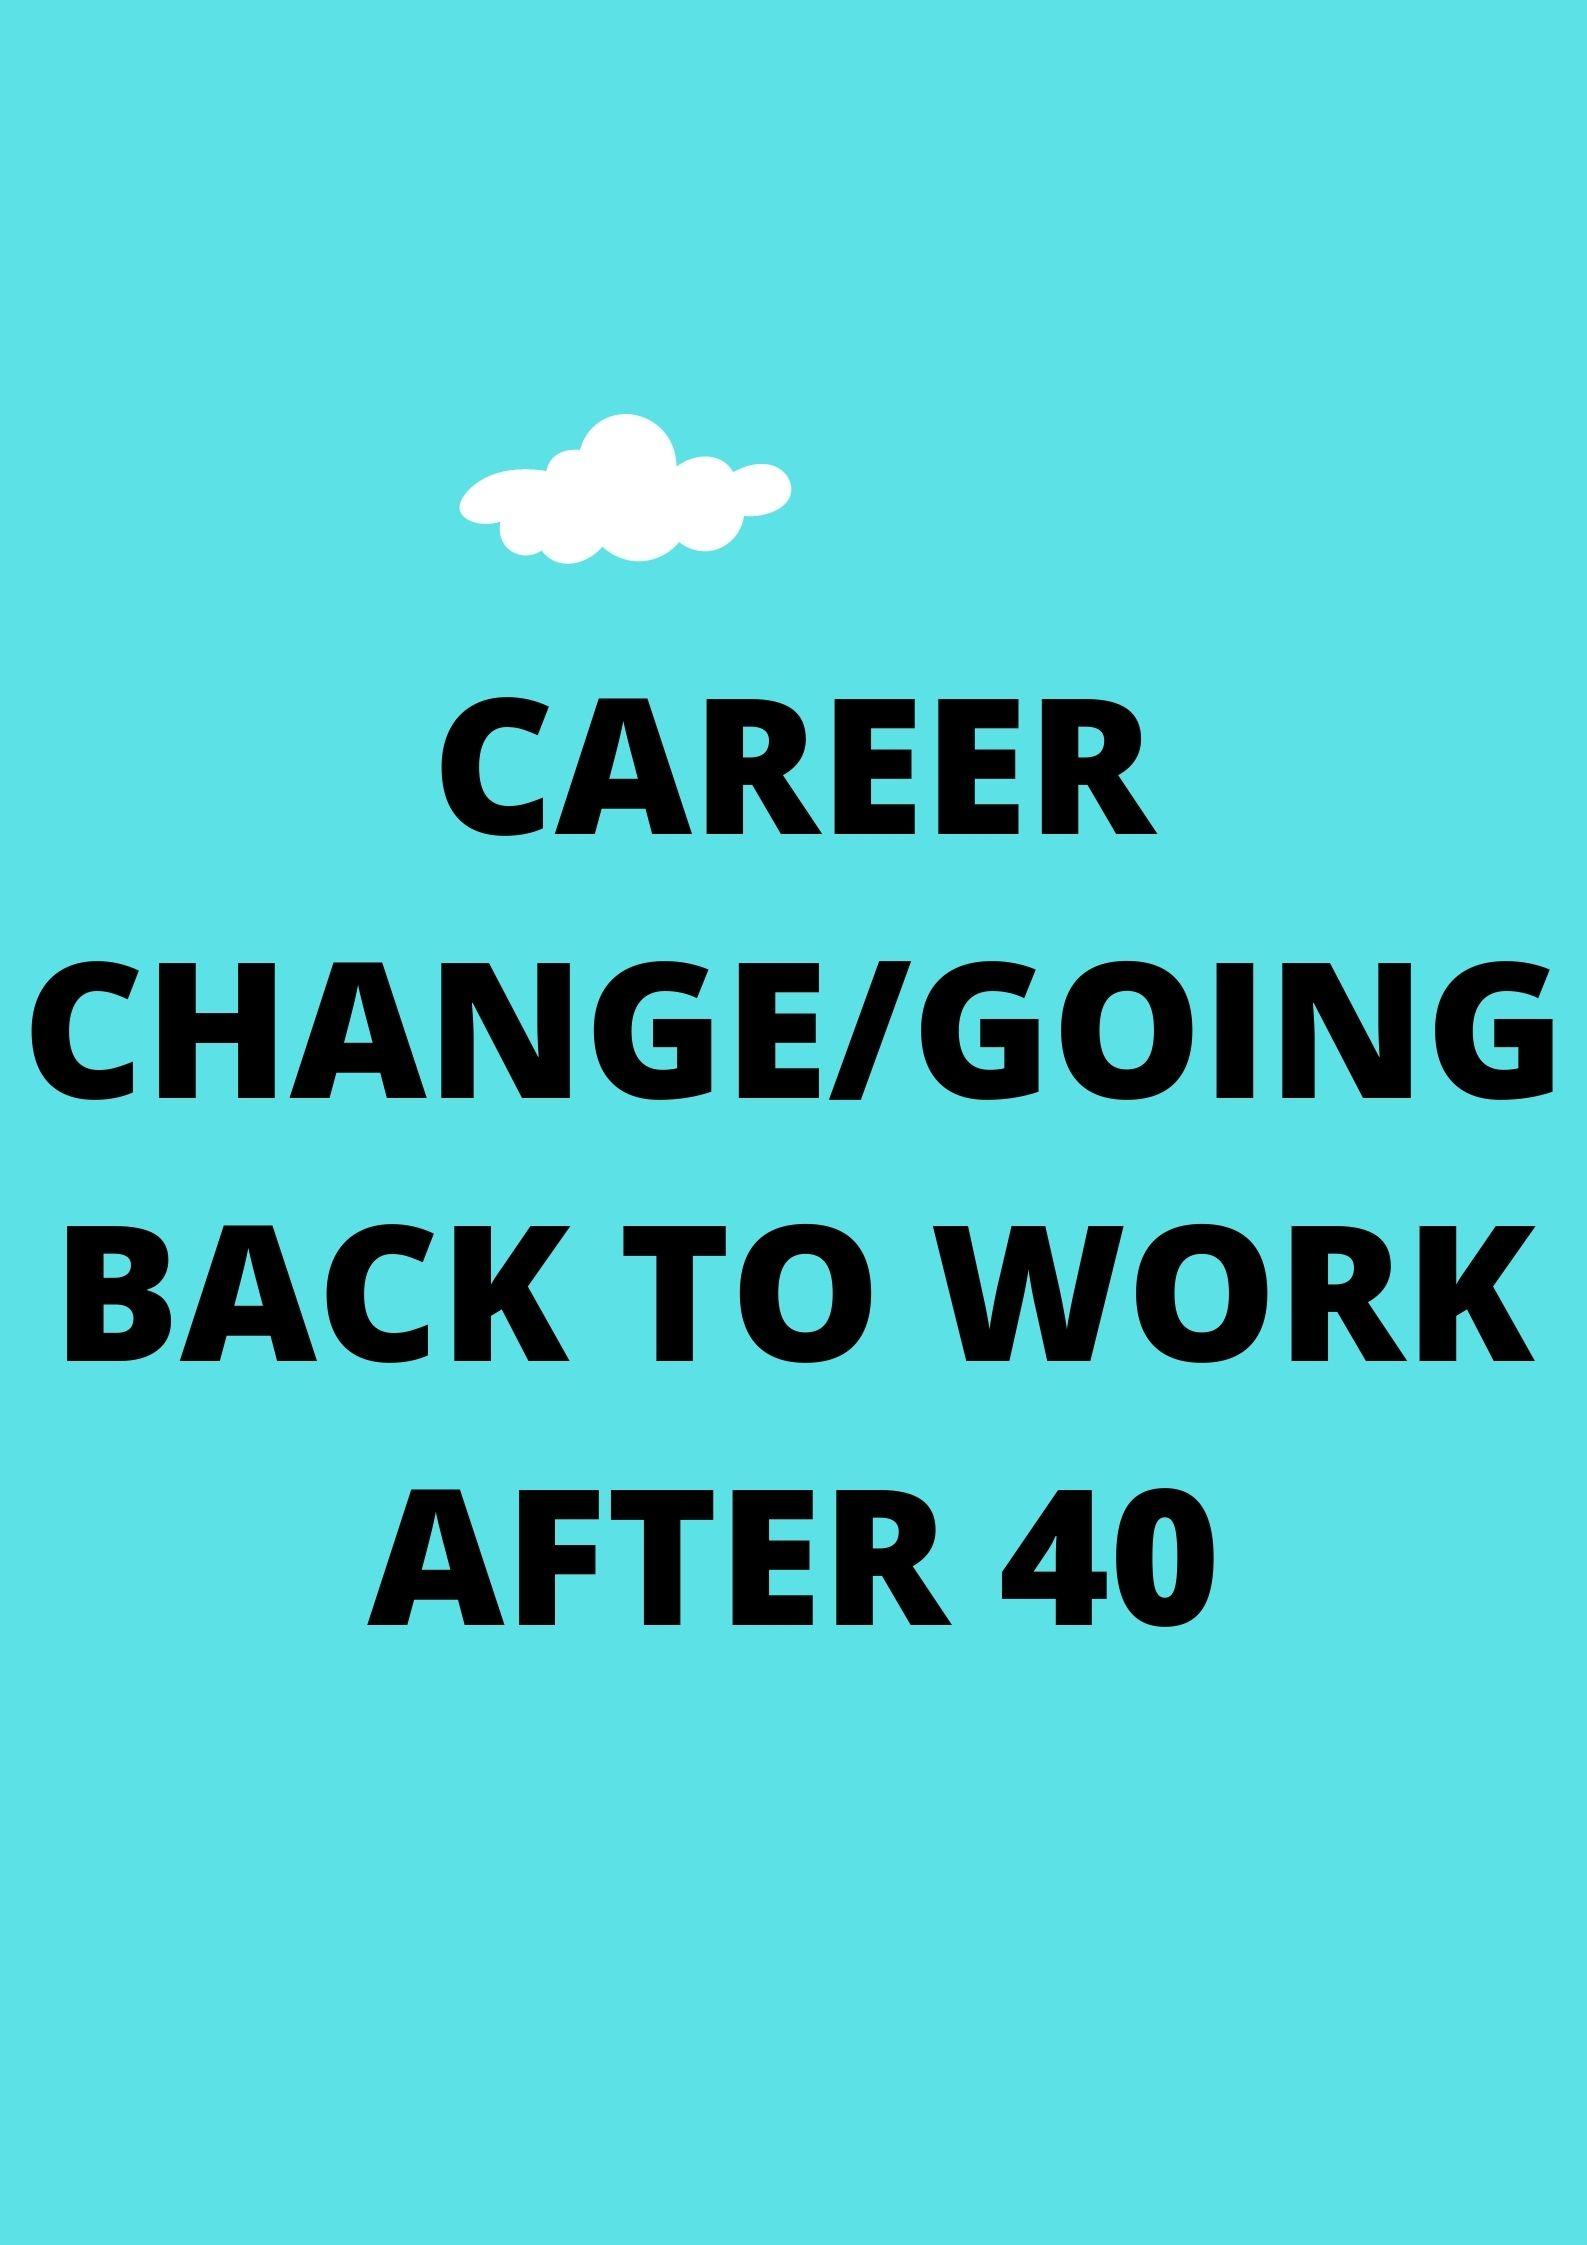 Best Jobs when Returning to Work/Changing Careers at 40